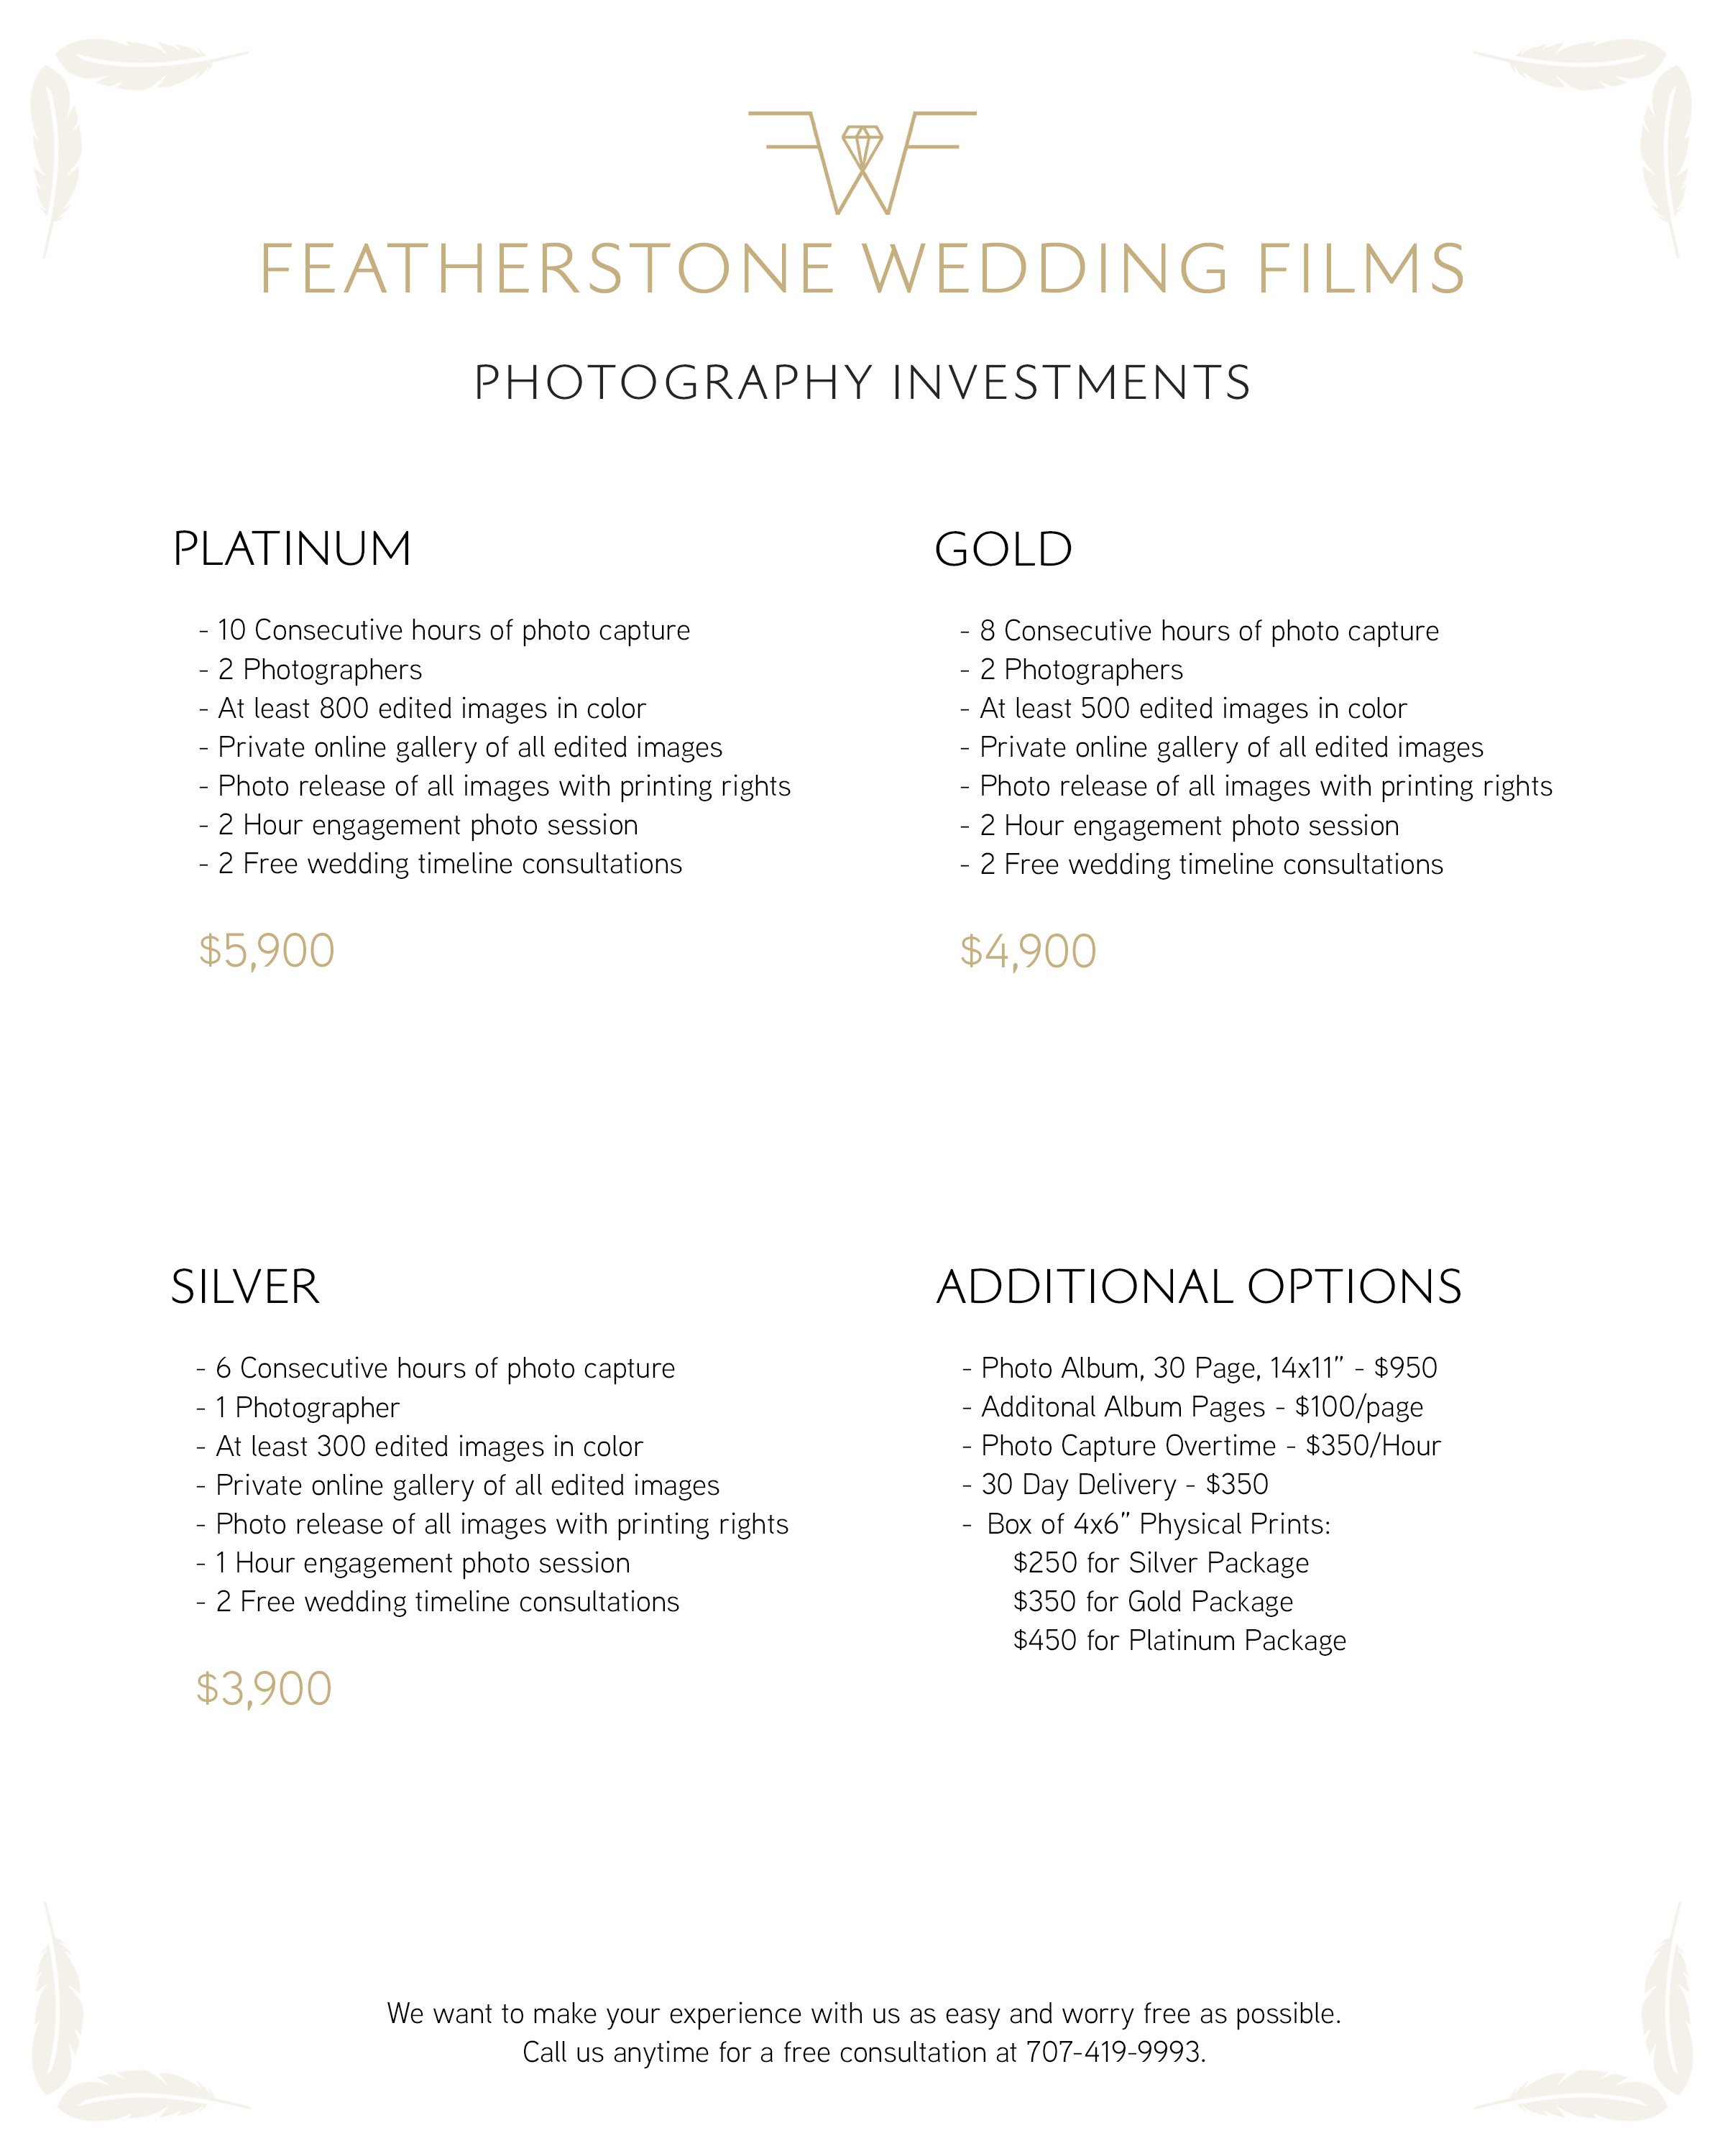 Featherstone Wedding Films - Photography Price Guide.jpg